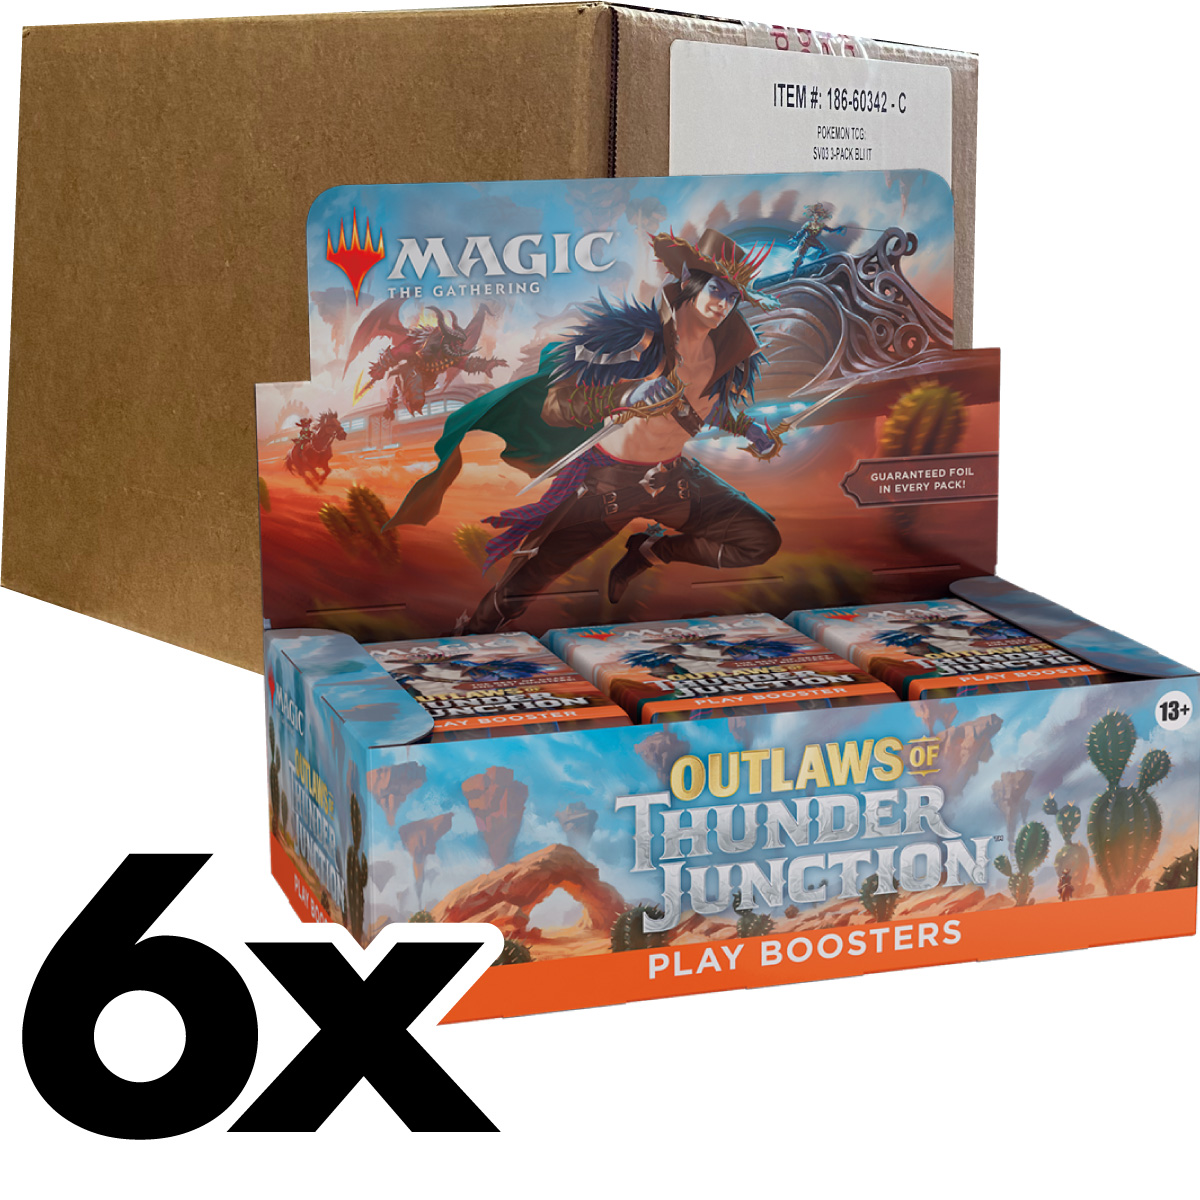 magic the gathering - outlaws of thunder junction - buste di gioco - case sigillato 6x box 36 buste (eng)